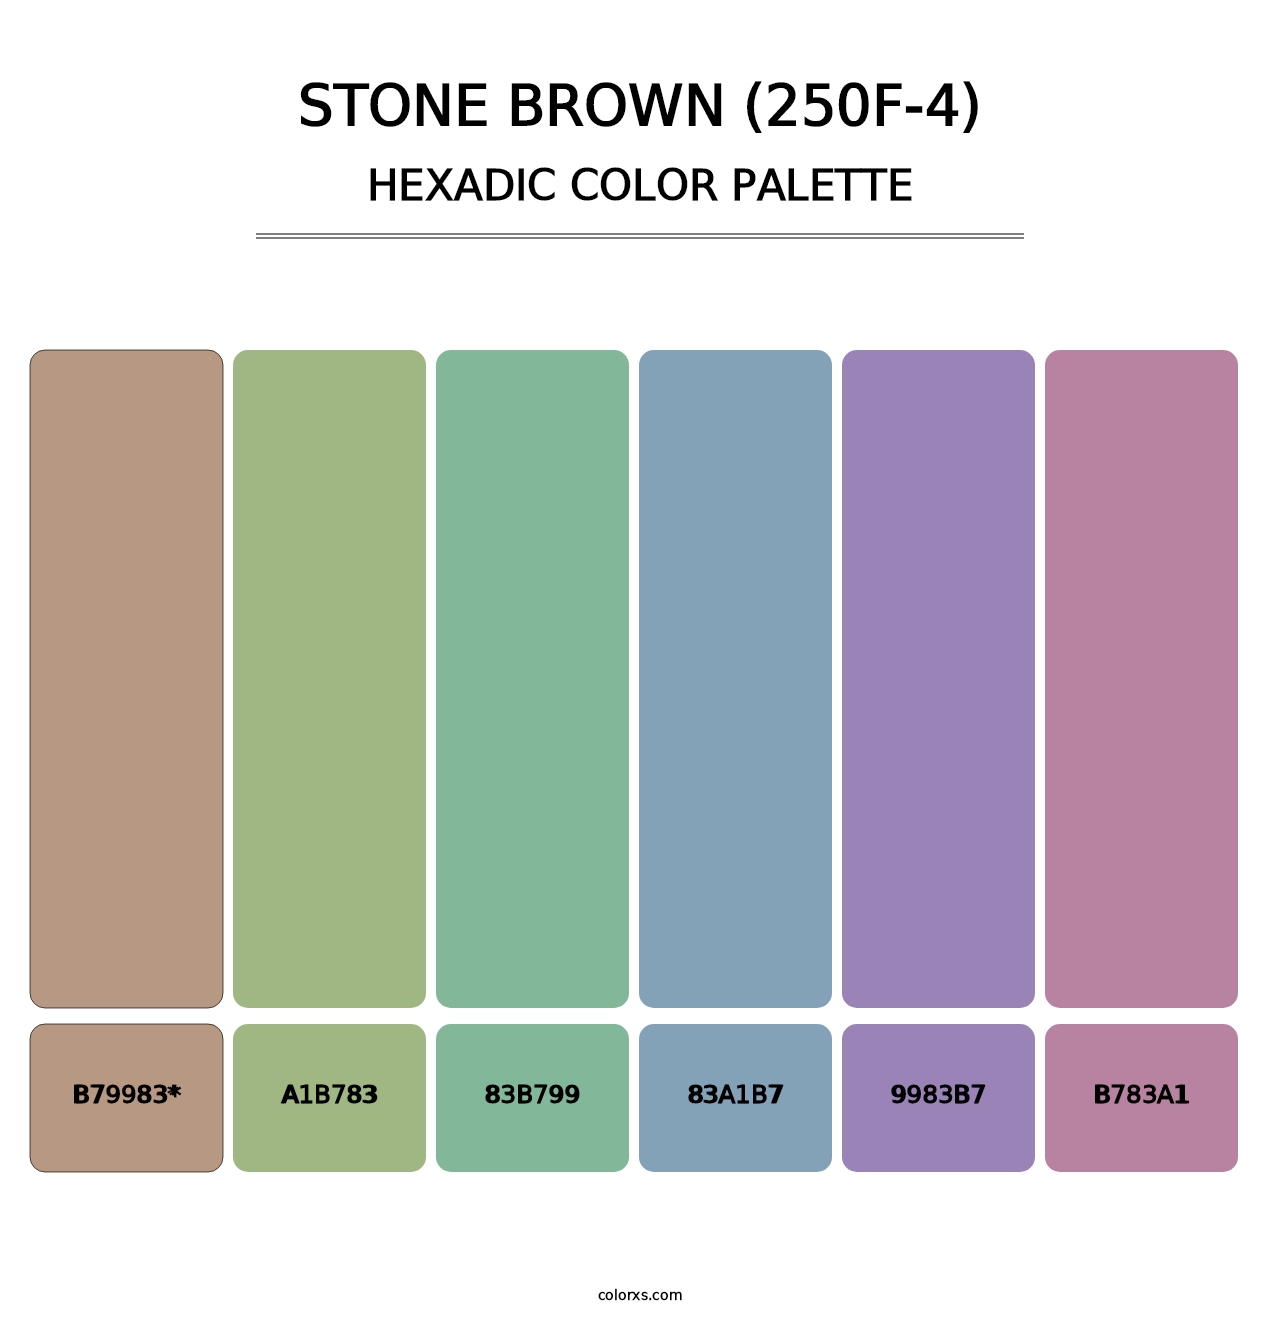 Stone Brown (250F-4) - Hexadic Color Palette